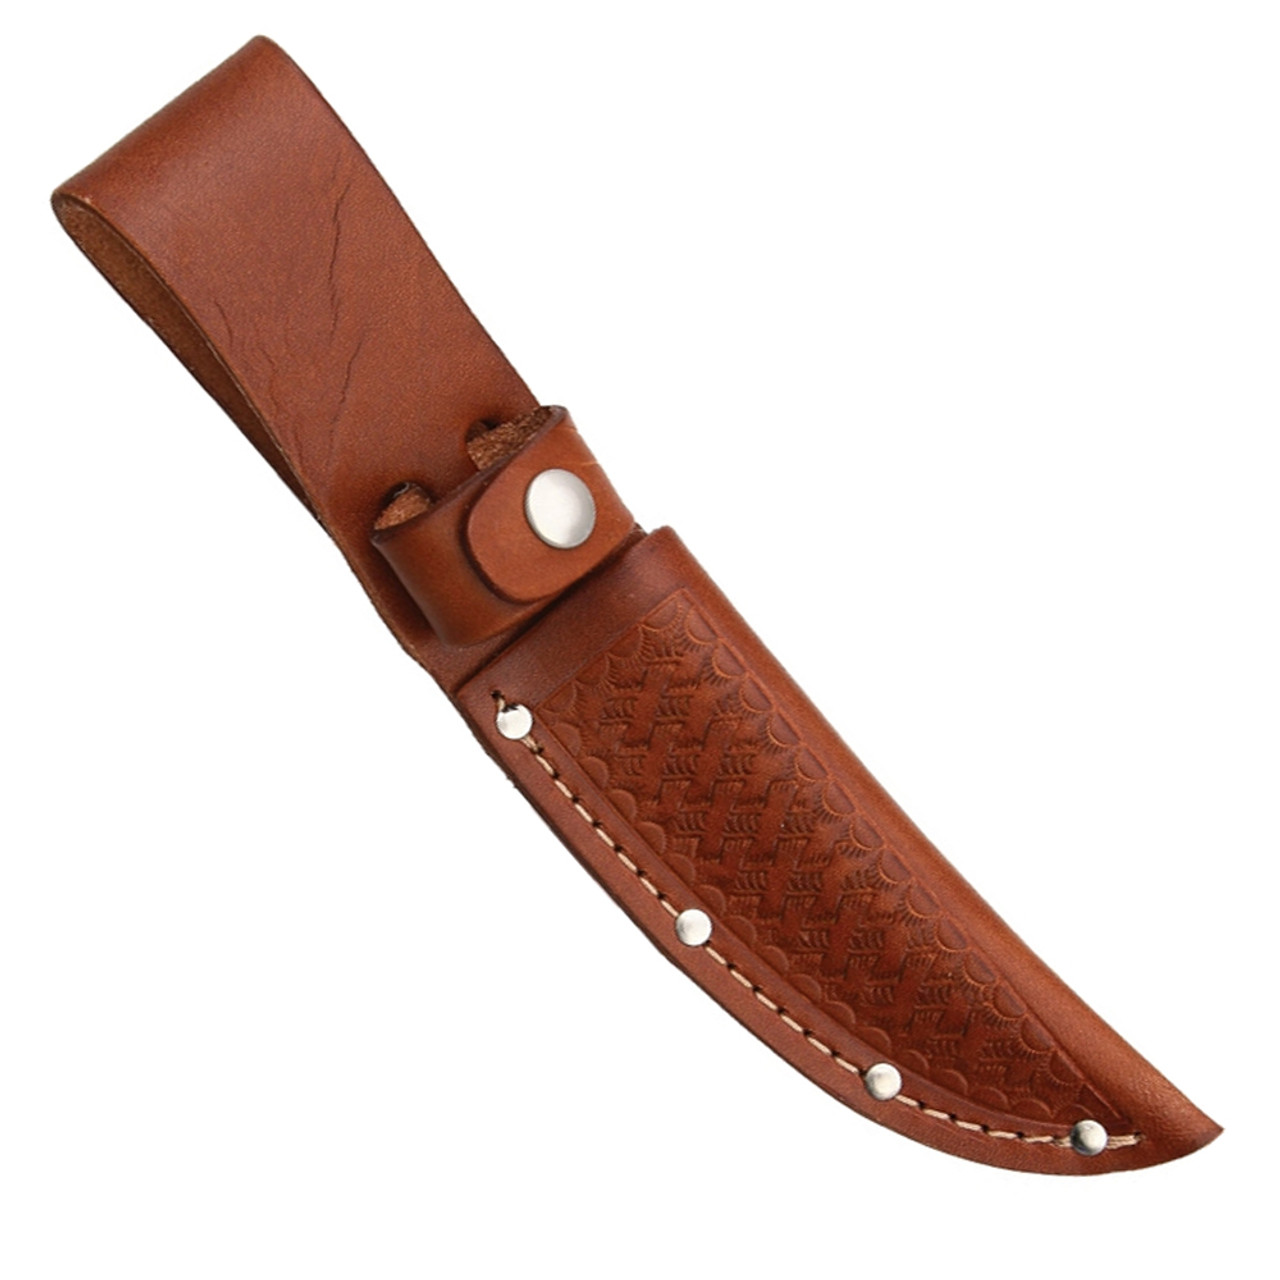 8.75 Straight Knife Sheath, Fits up to 4 Blade, Natural